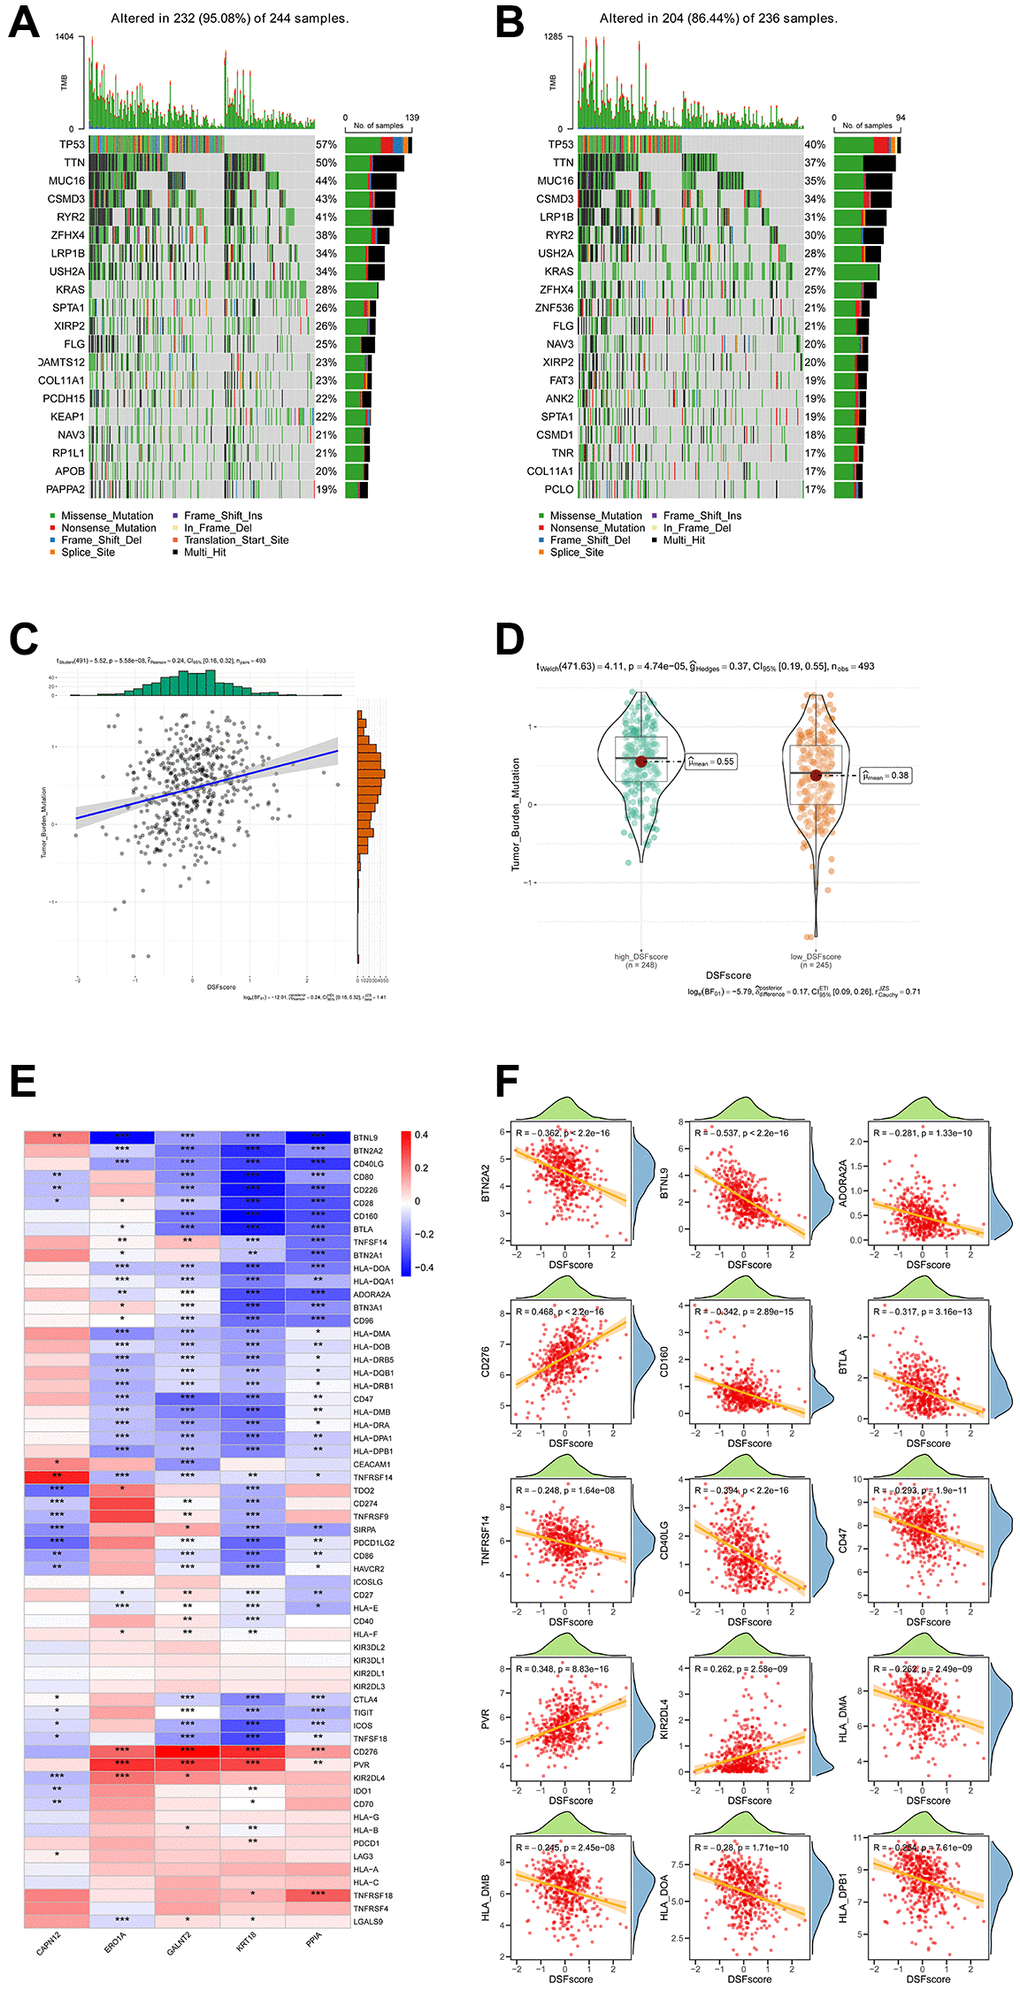 Associations between the DRG score and TMB as well as ICGs. (A, B) A comparative analysis of mutational profiles in two risk groups of LUAD. (C) Correlations between TMB and the DRG score within various gene clusters. (D) Disparities in TMB score among high-risk and low-risk groups. (E) Correlations between the expression of ICGs and the five genes included in the DRG prognostic model. (F) Correlations between the expression of ICGs and the DRG score. *P **P ***P 